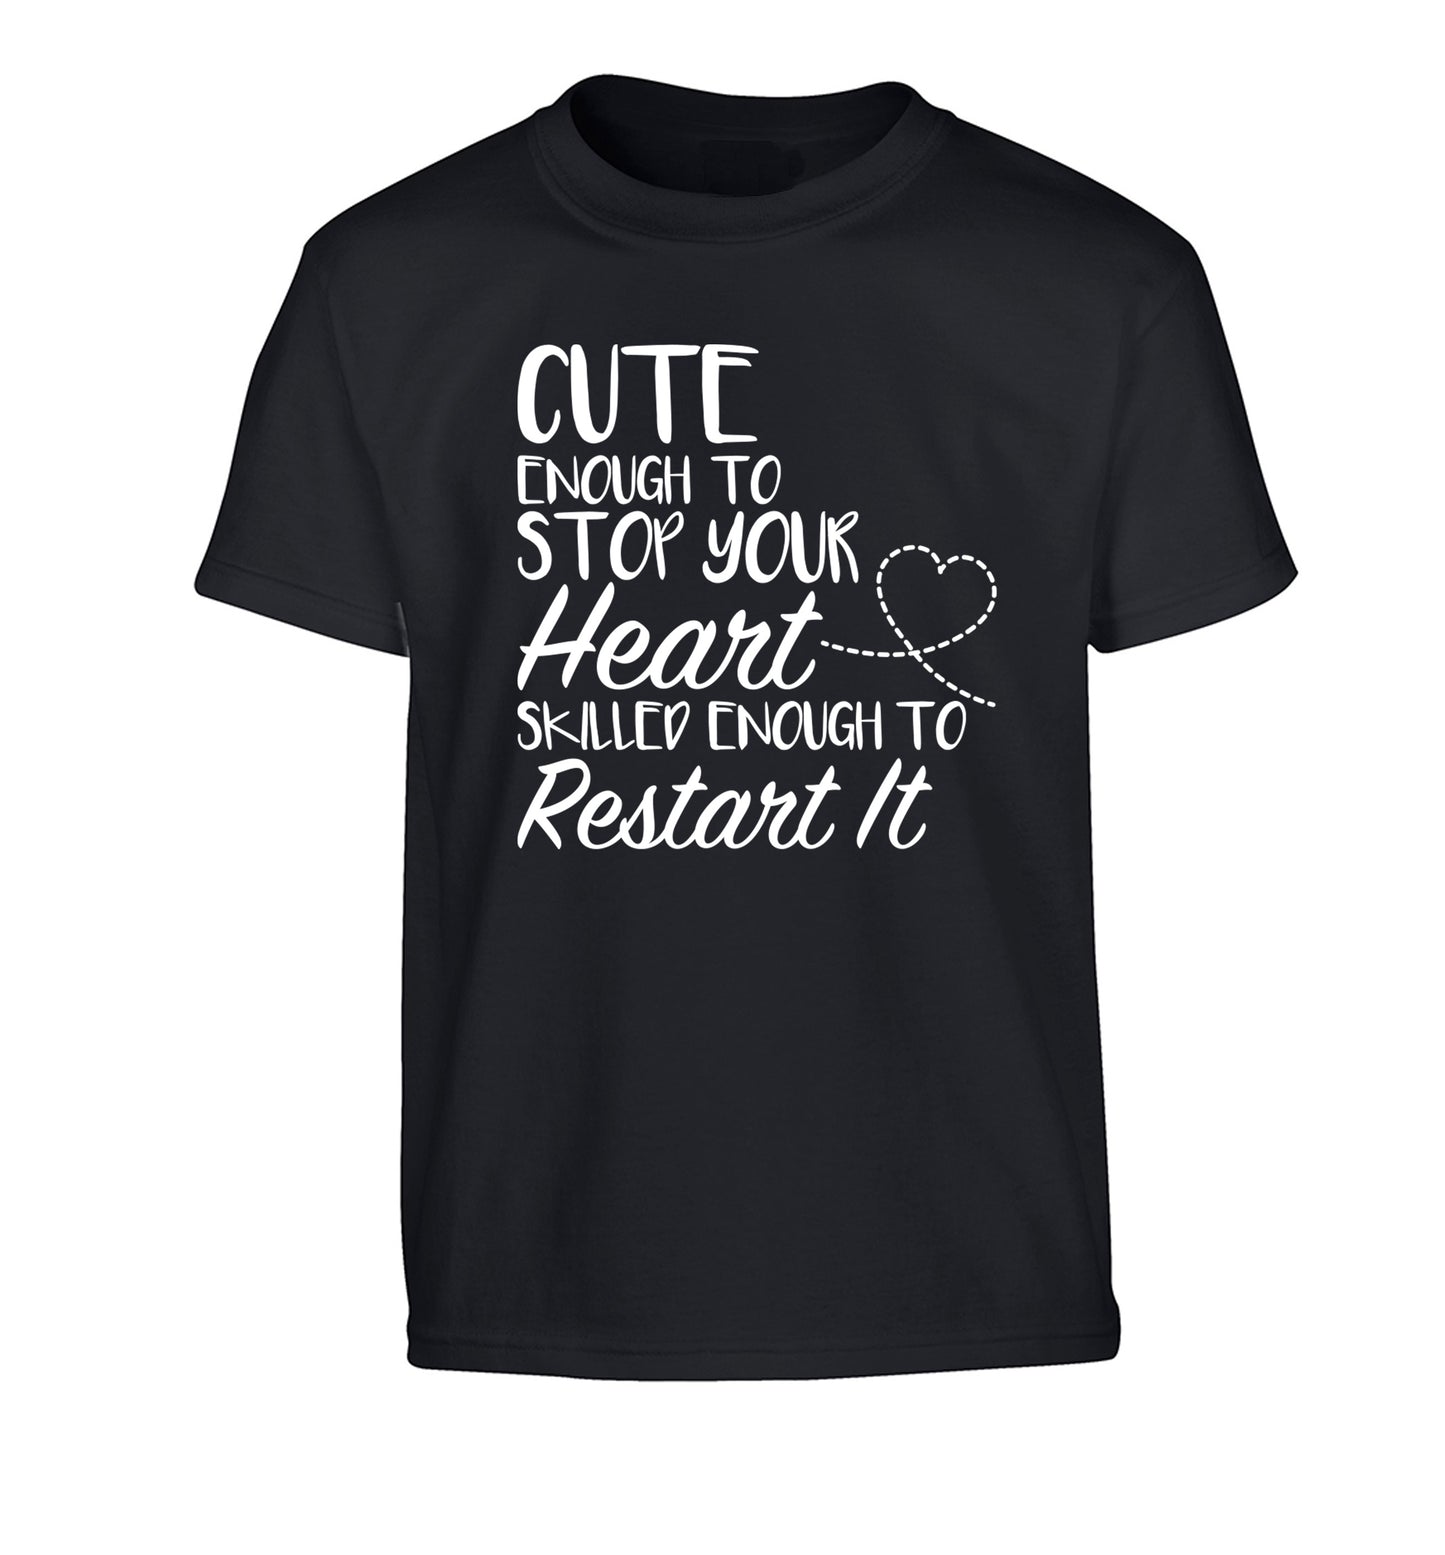 Cute enough to stop your heart skilled enough to restart it Children's black Tshirt 12-13 Years